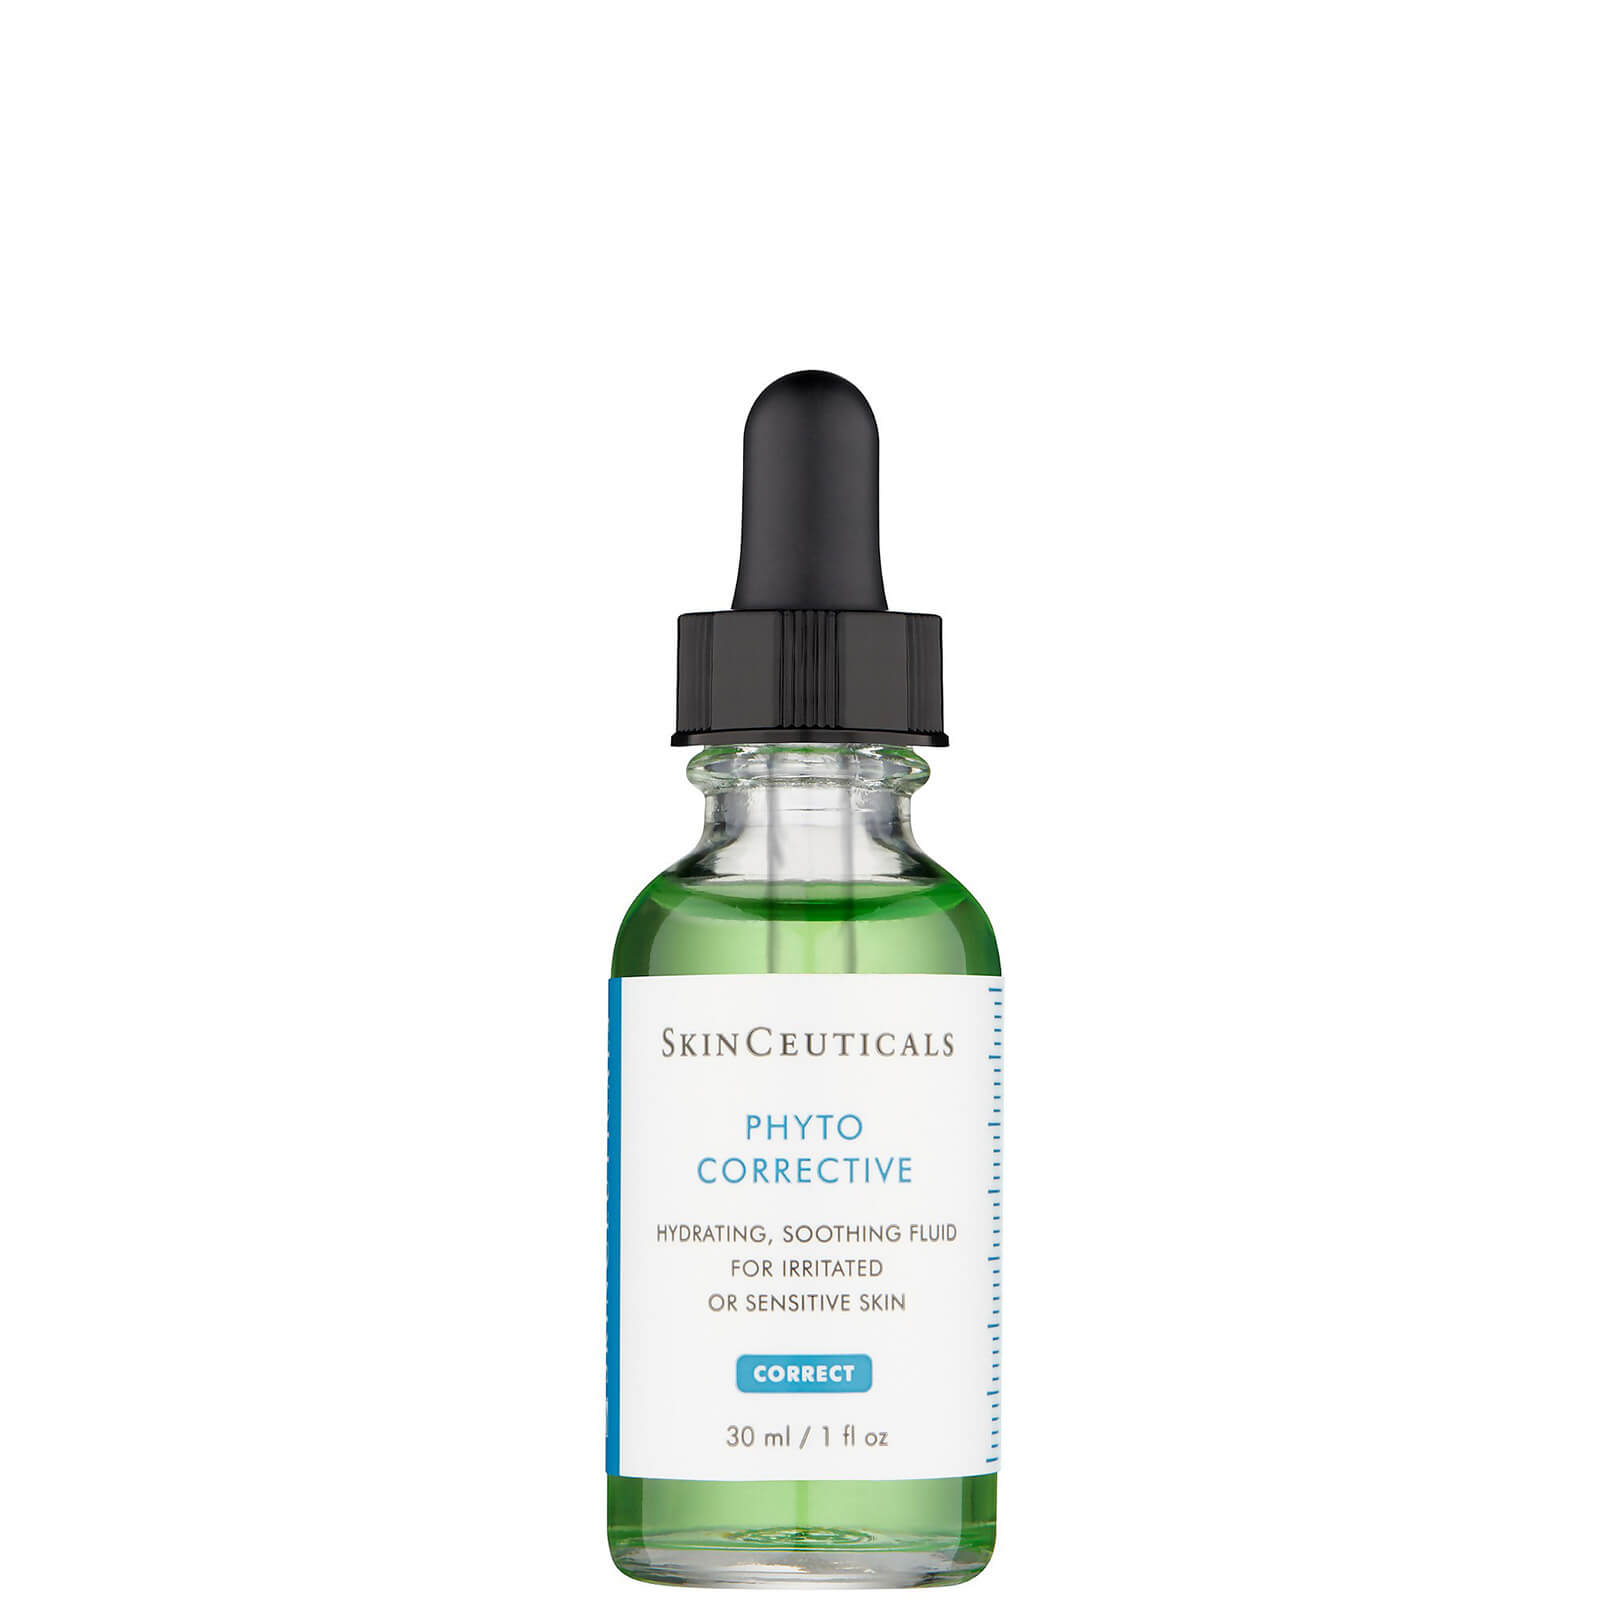 Skinceuticals Phyto Corrective Hyaluronic Acid Serum Gel 30ml In White